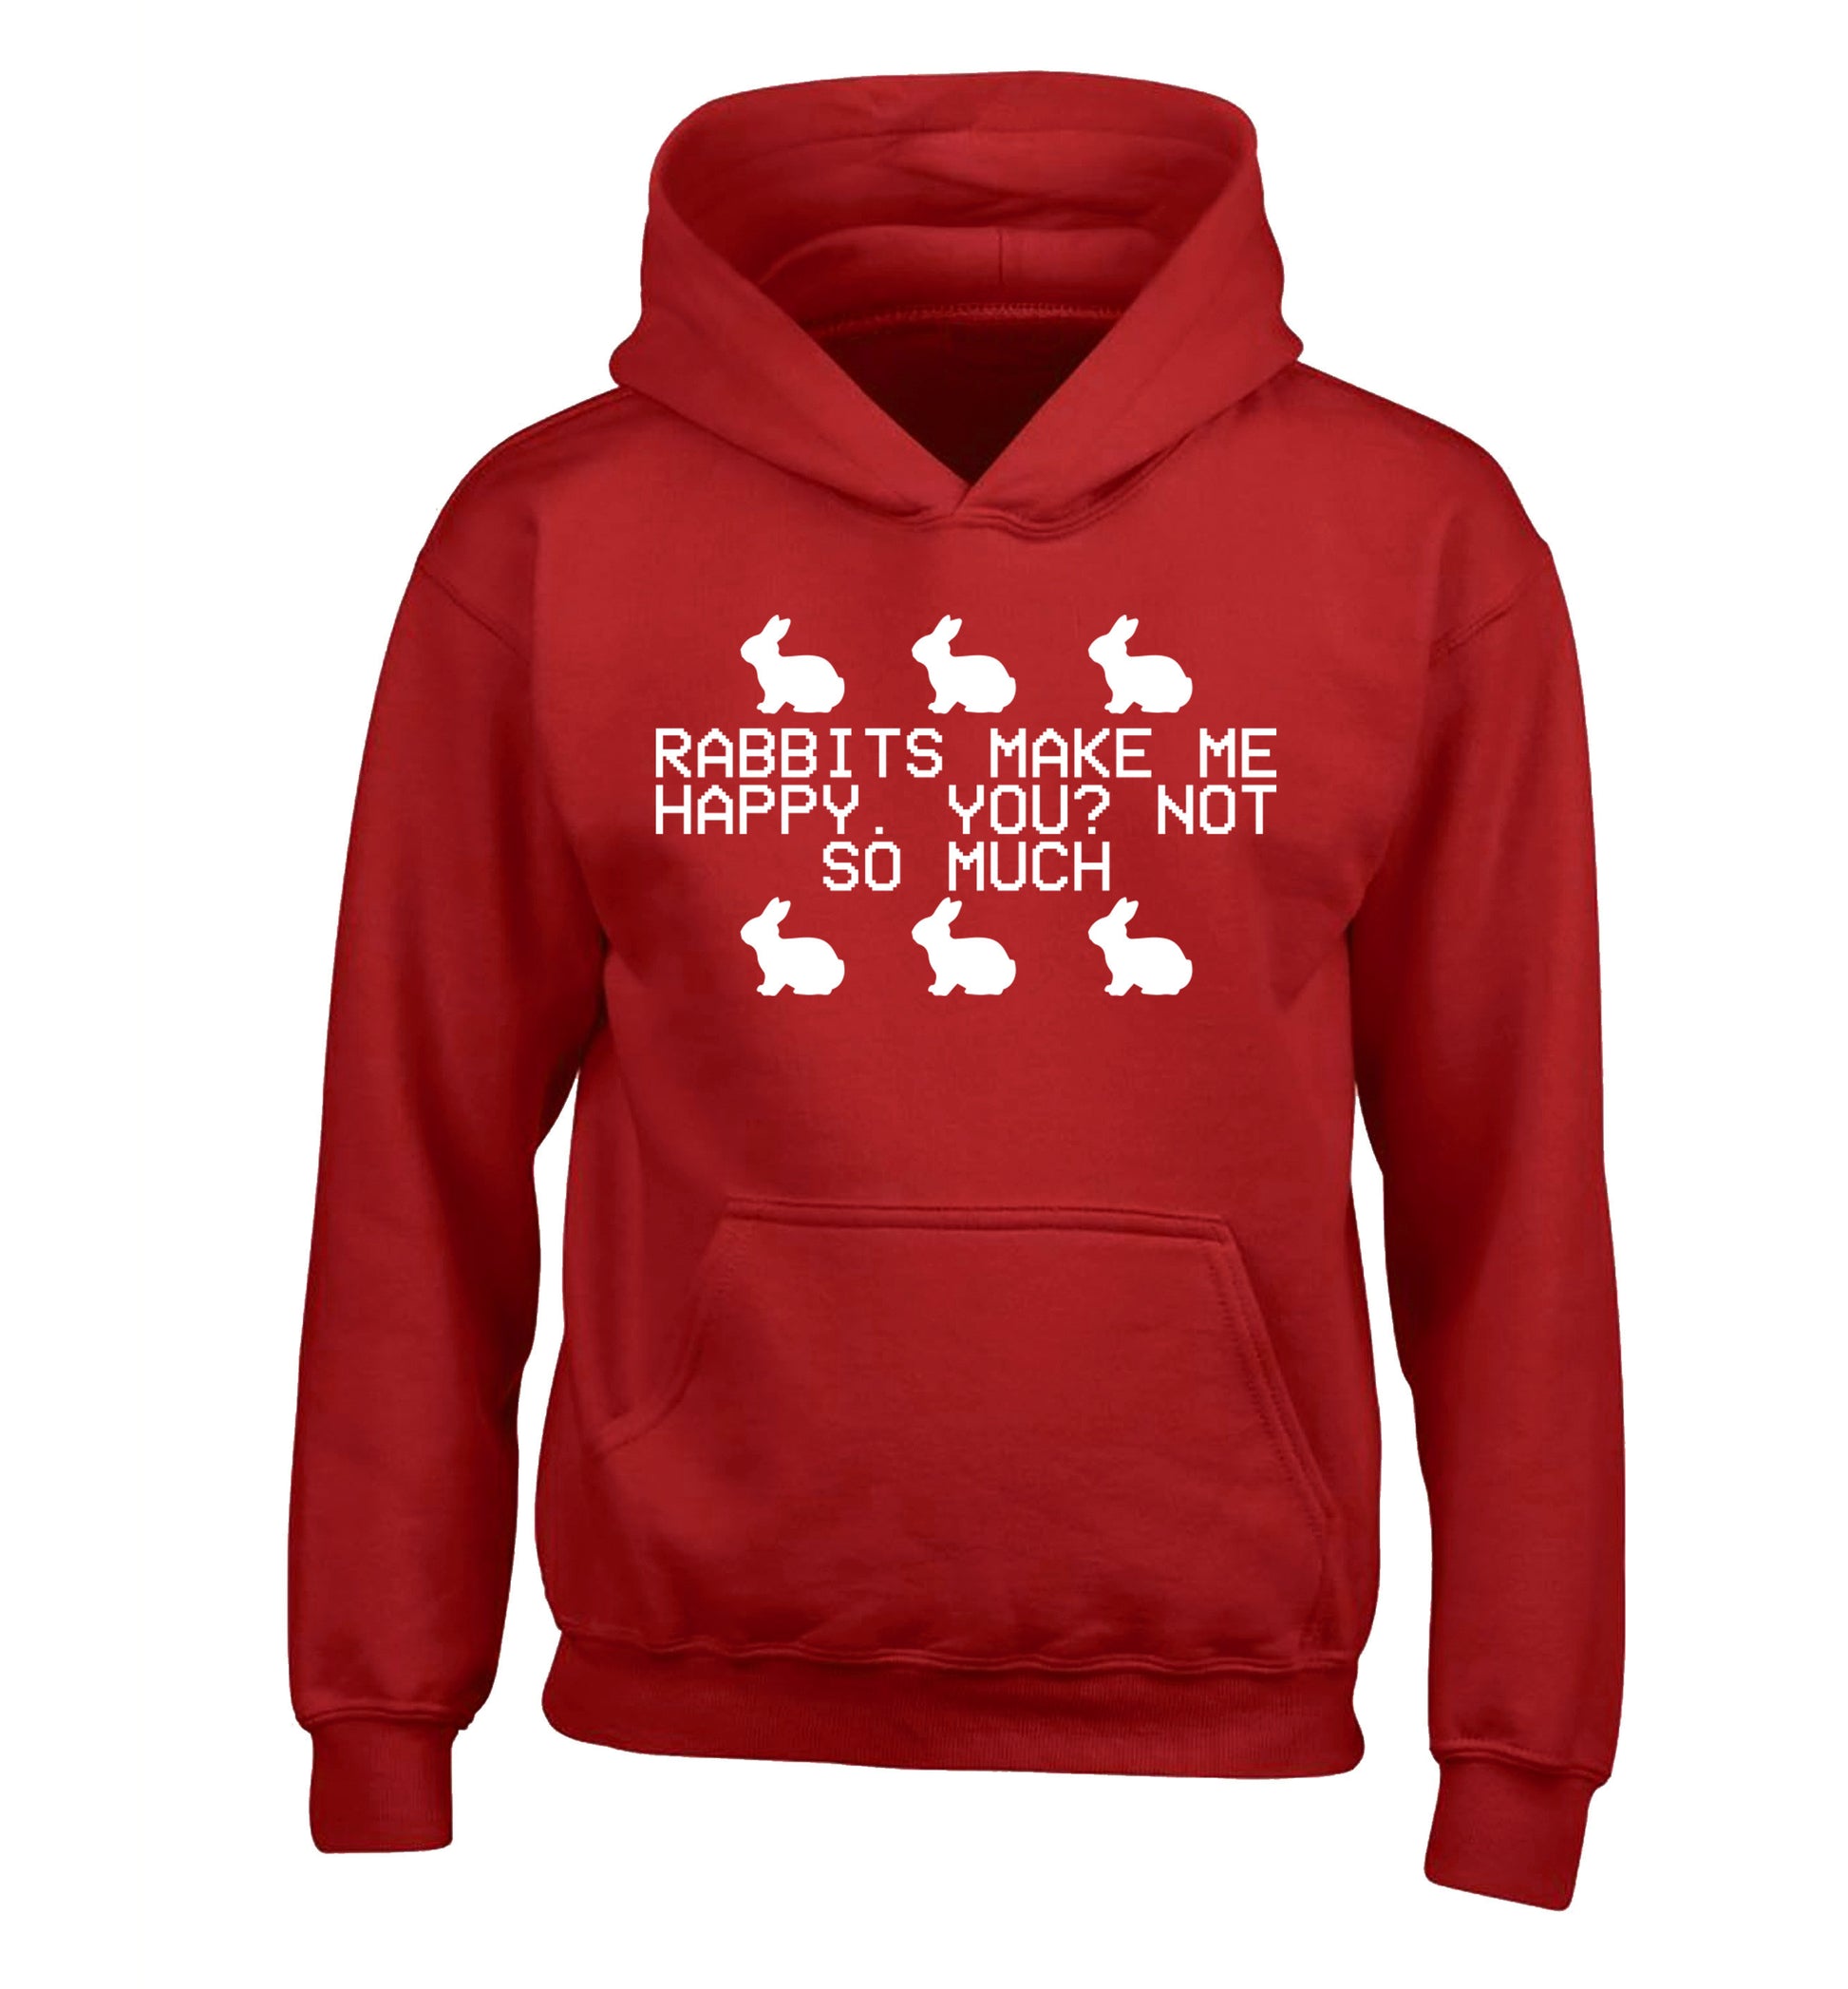 Rabbits make me happy, you not so much children's red hoodie 12-14 Years